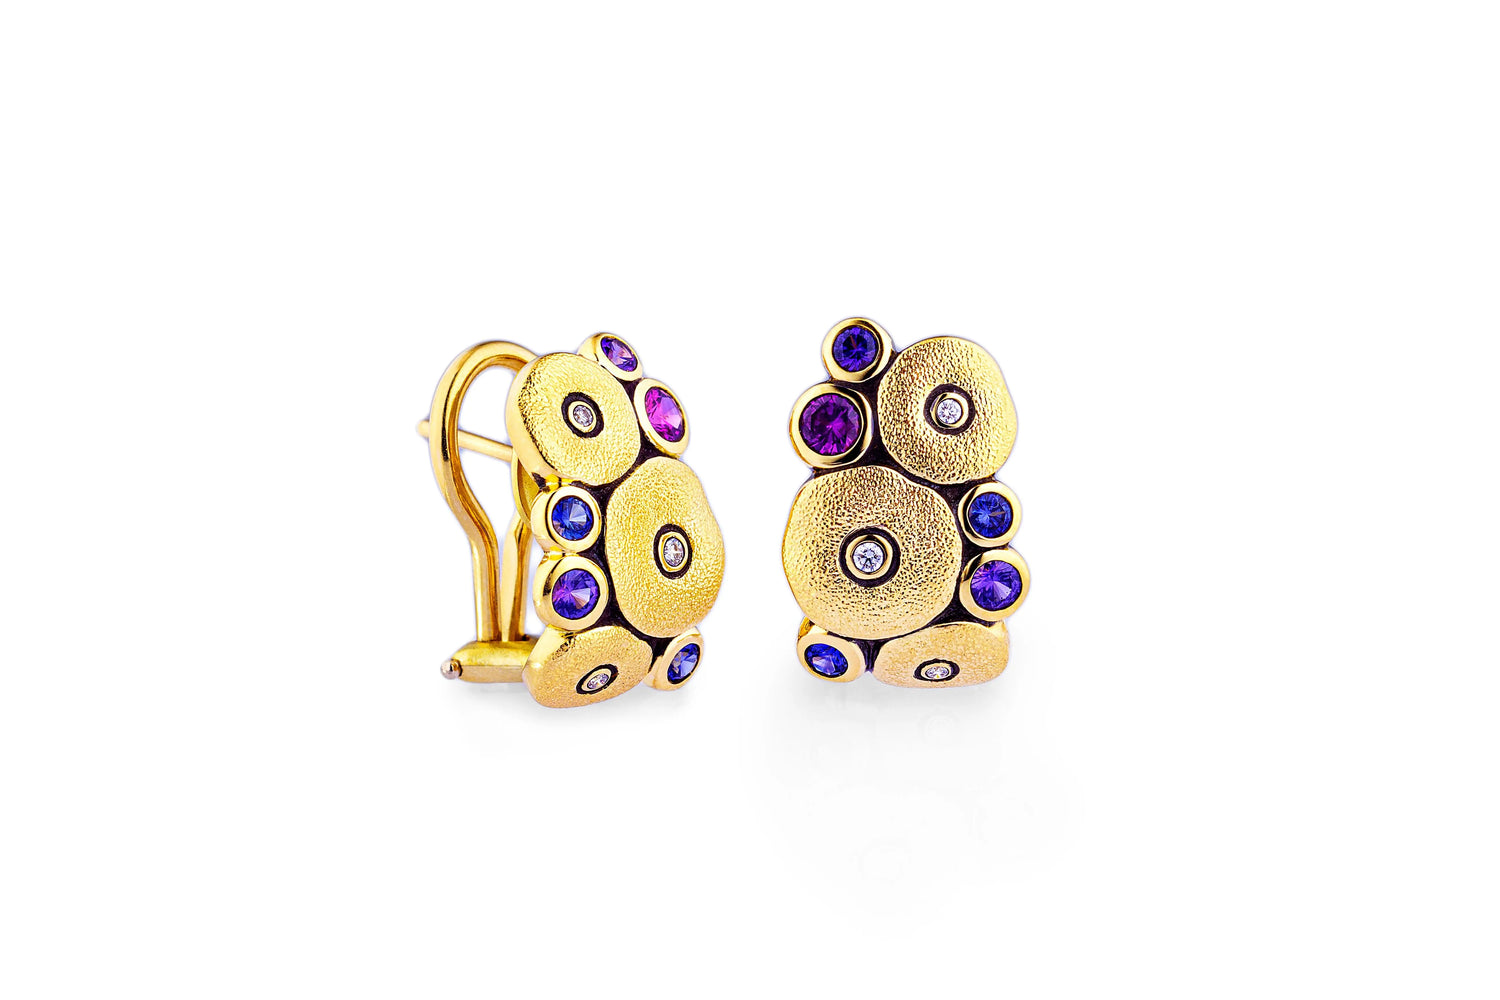 18k yellow gold diamond and sapphire "Orchard" Earrings.  Details: 6 diamonds .04ct and 10 sapphires.   Note: If you are interested in different stones, please email shop@sbvail.com.  If an item is out of stock, please allow 4-6 weeks for delivery.  Designed by Alex Sepkus